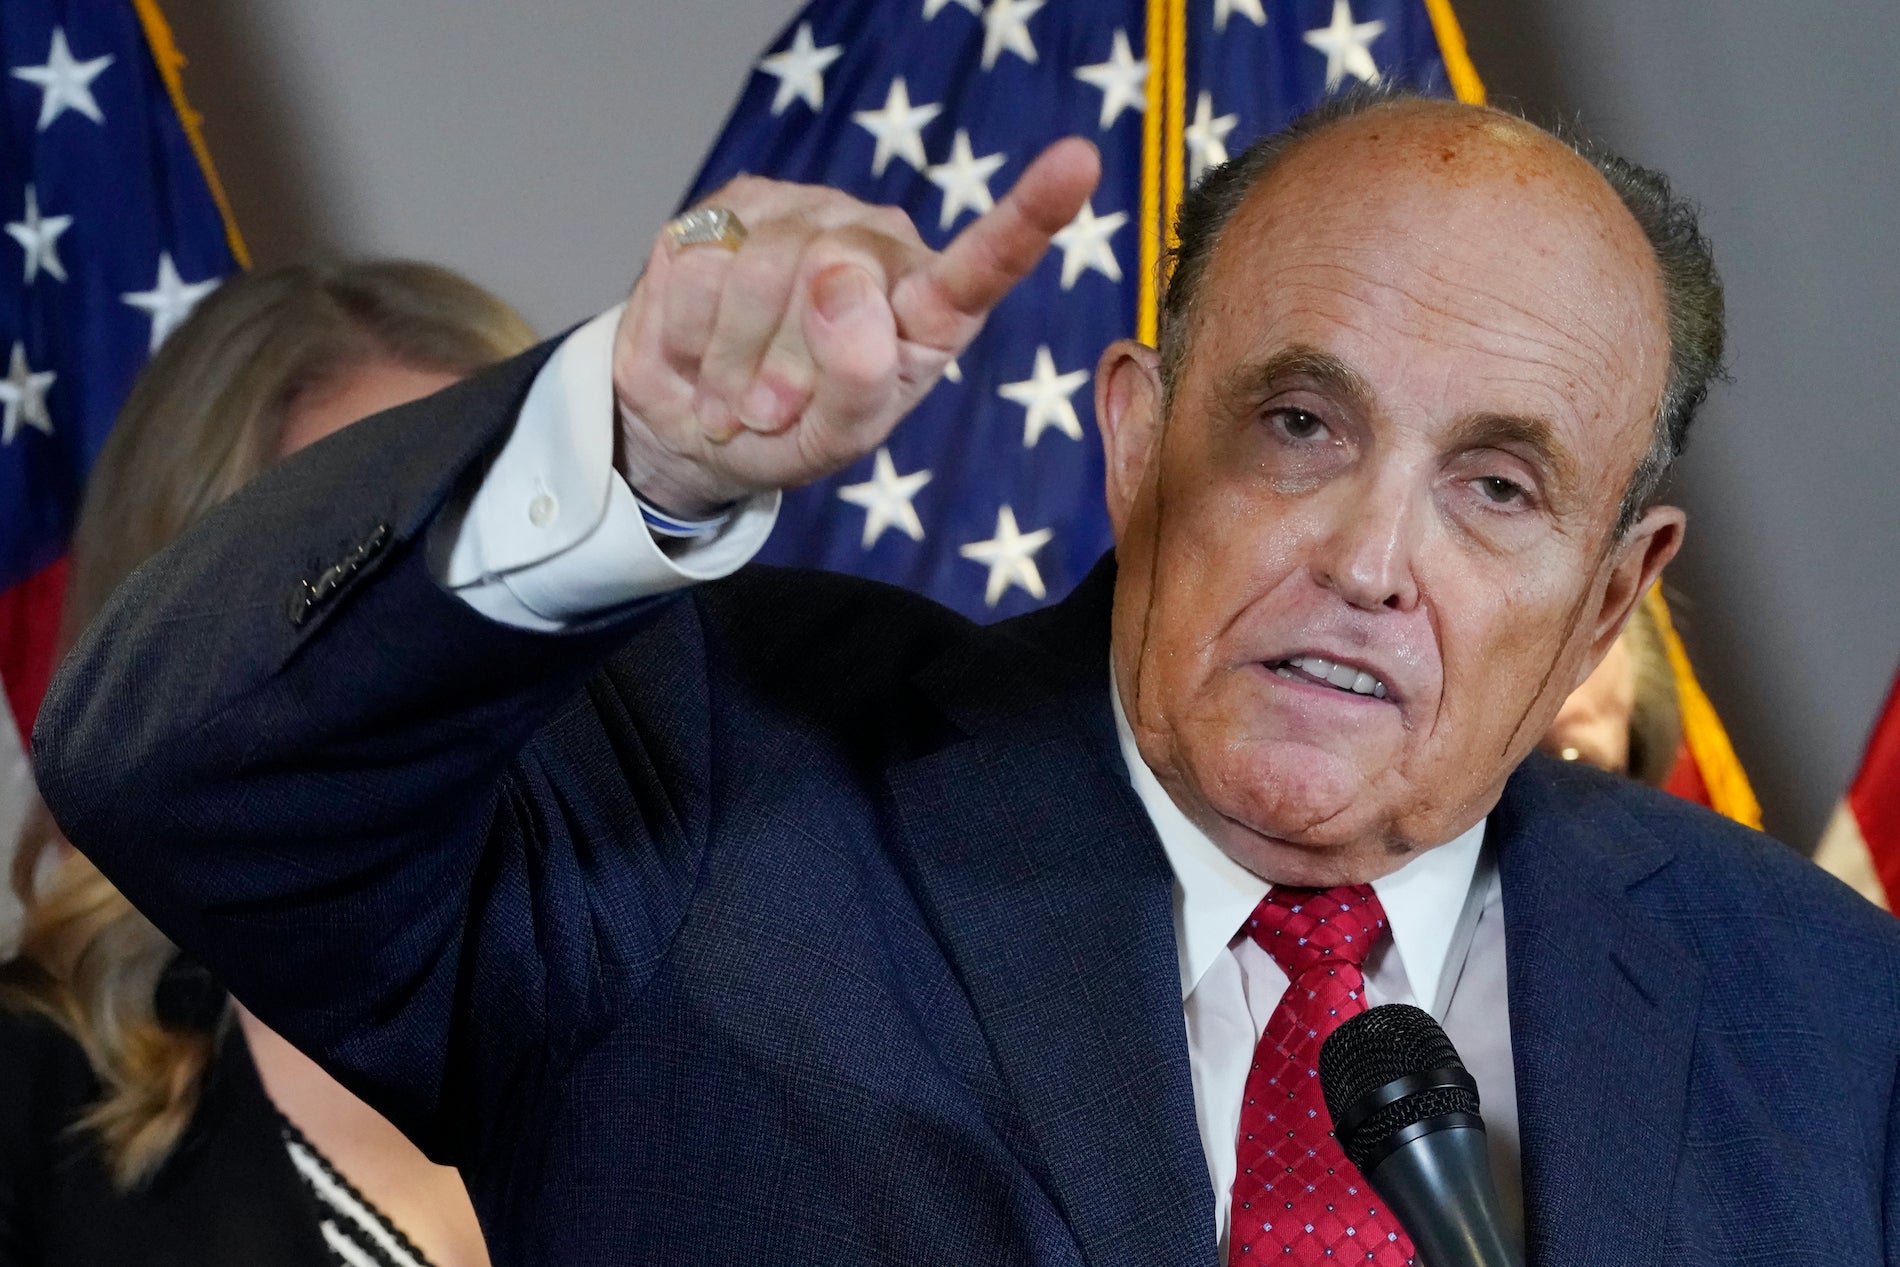 Rudy Giuliani speaks during a news conference